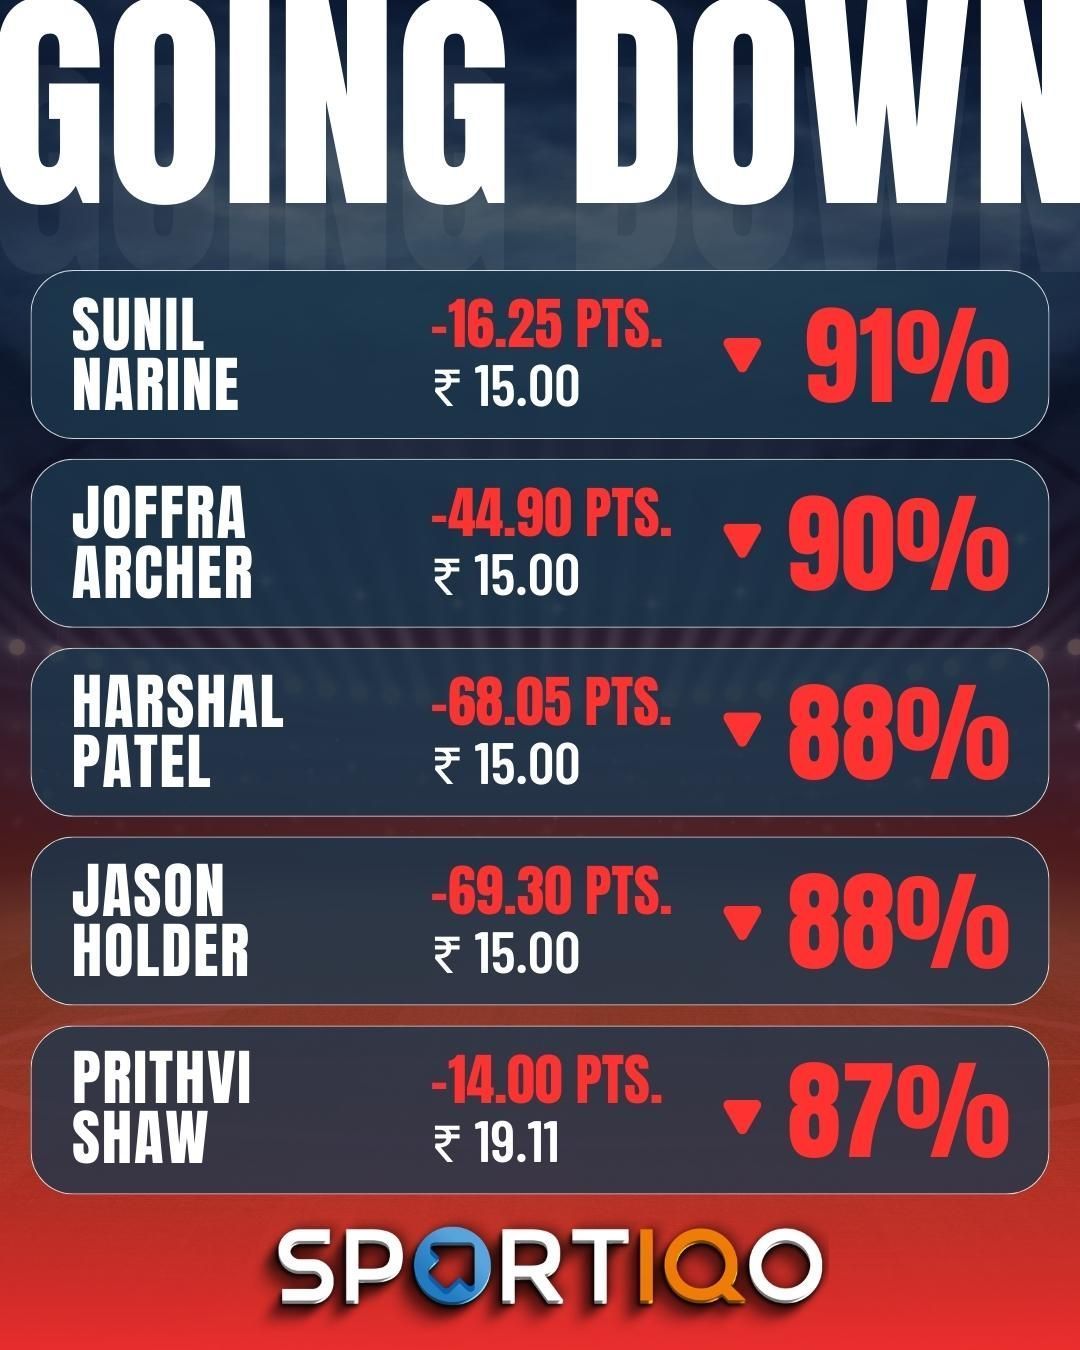 Sunil Narine and Jofra Archer were among those that saw their stocks drop in the past week.